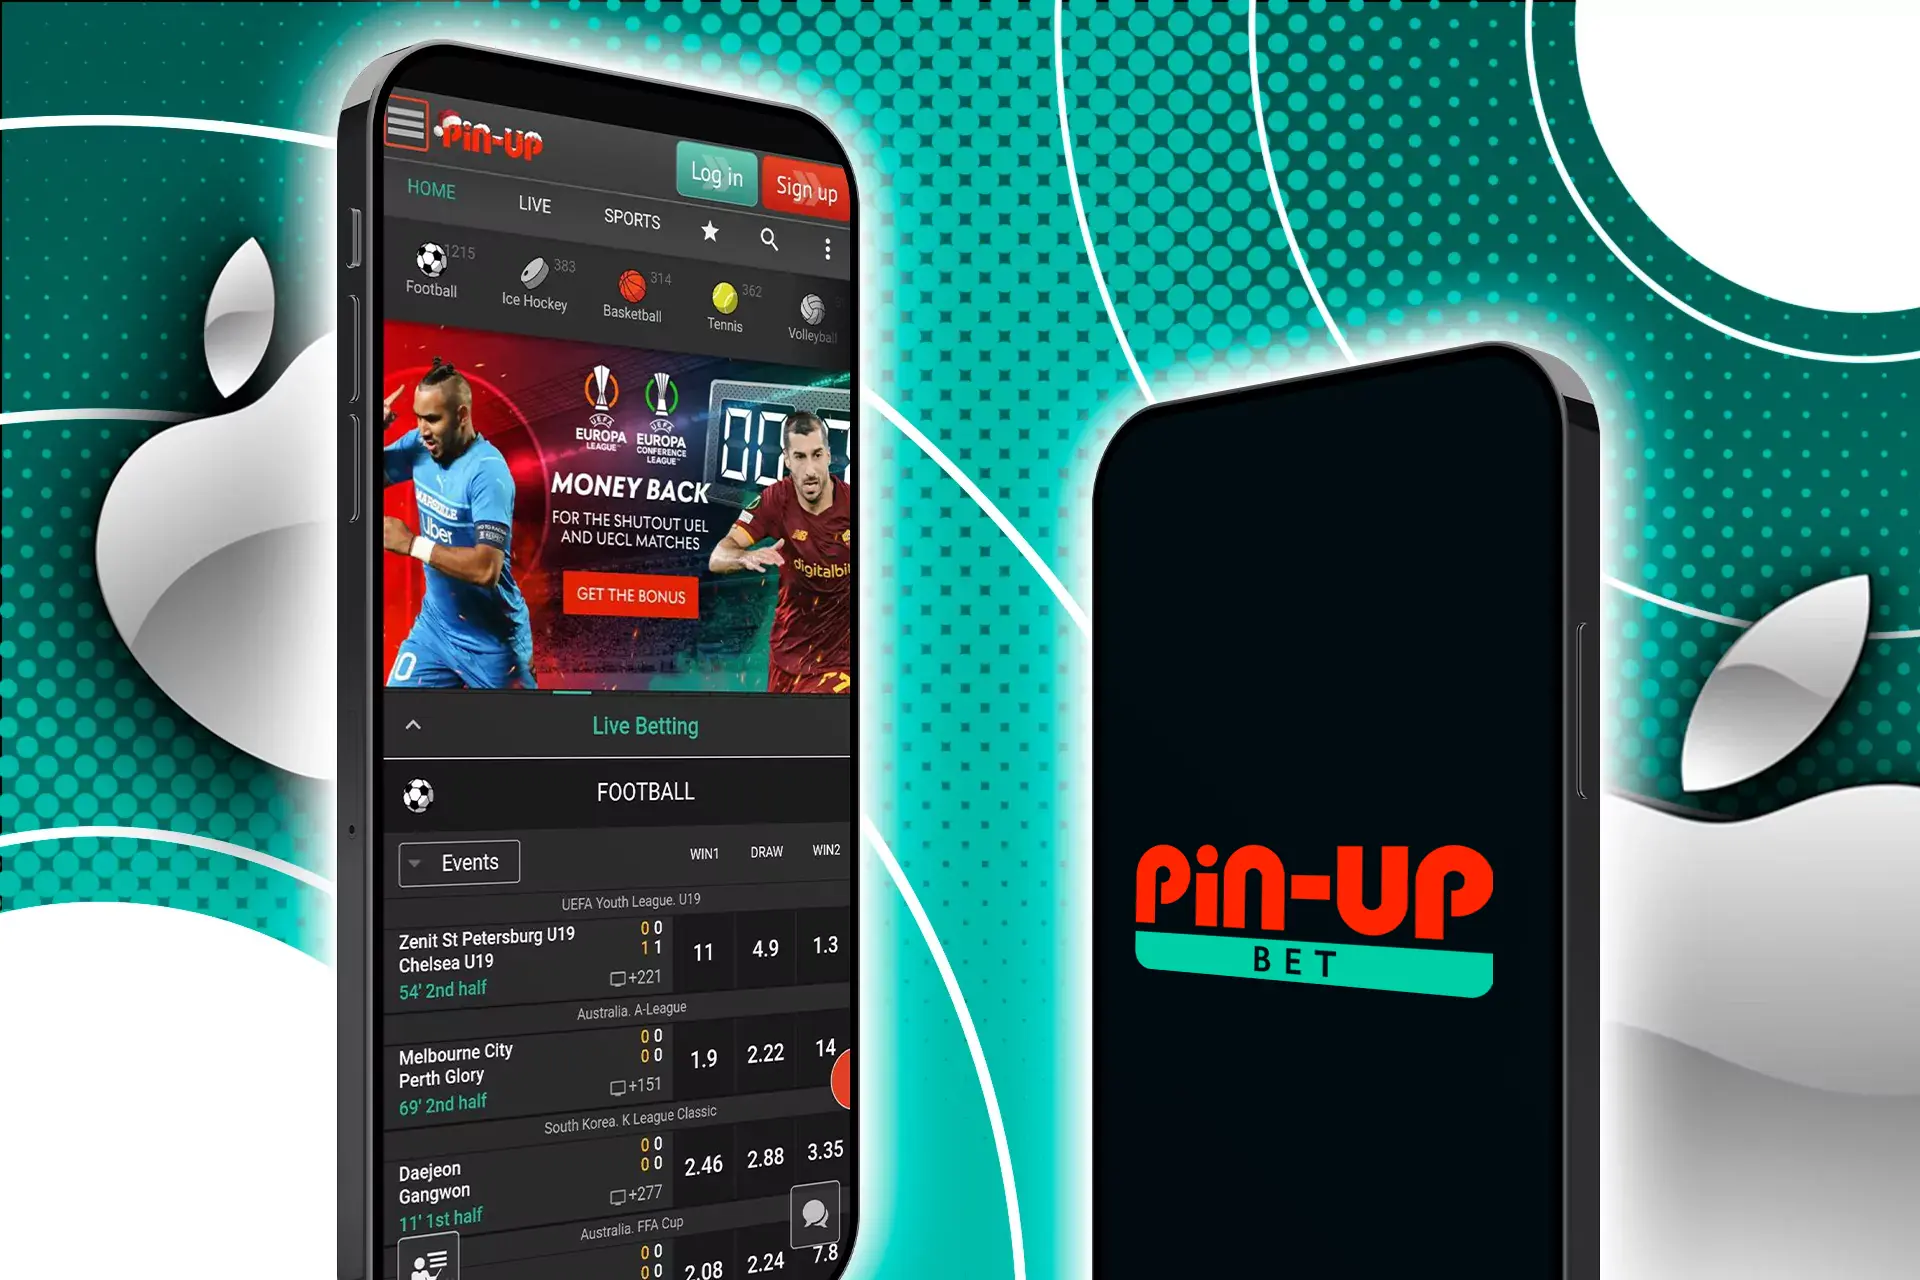 Install the iOS mobile app and bet at Pin Up.